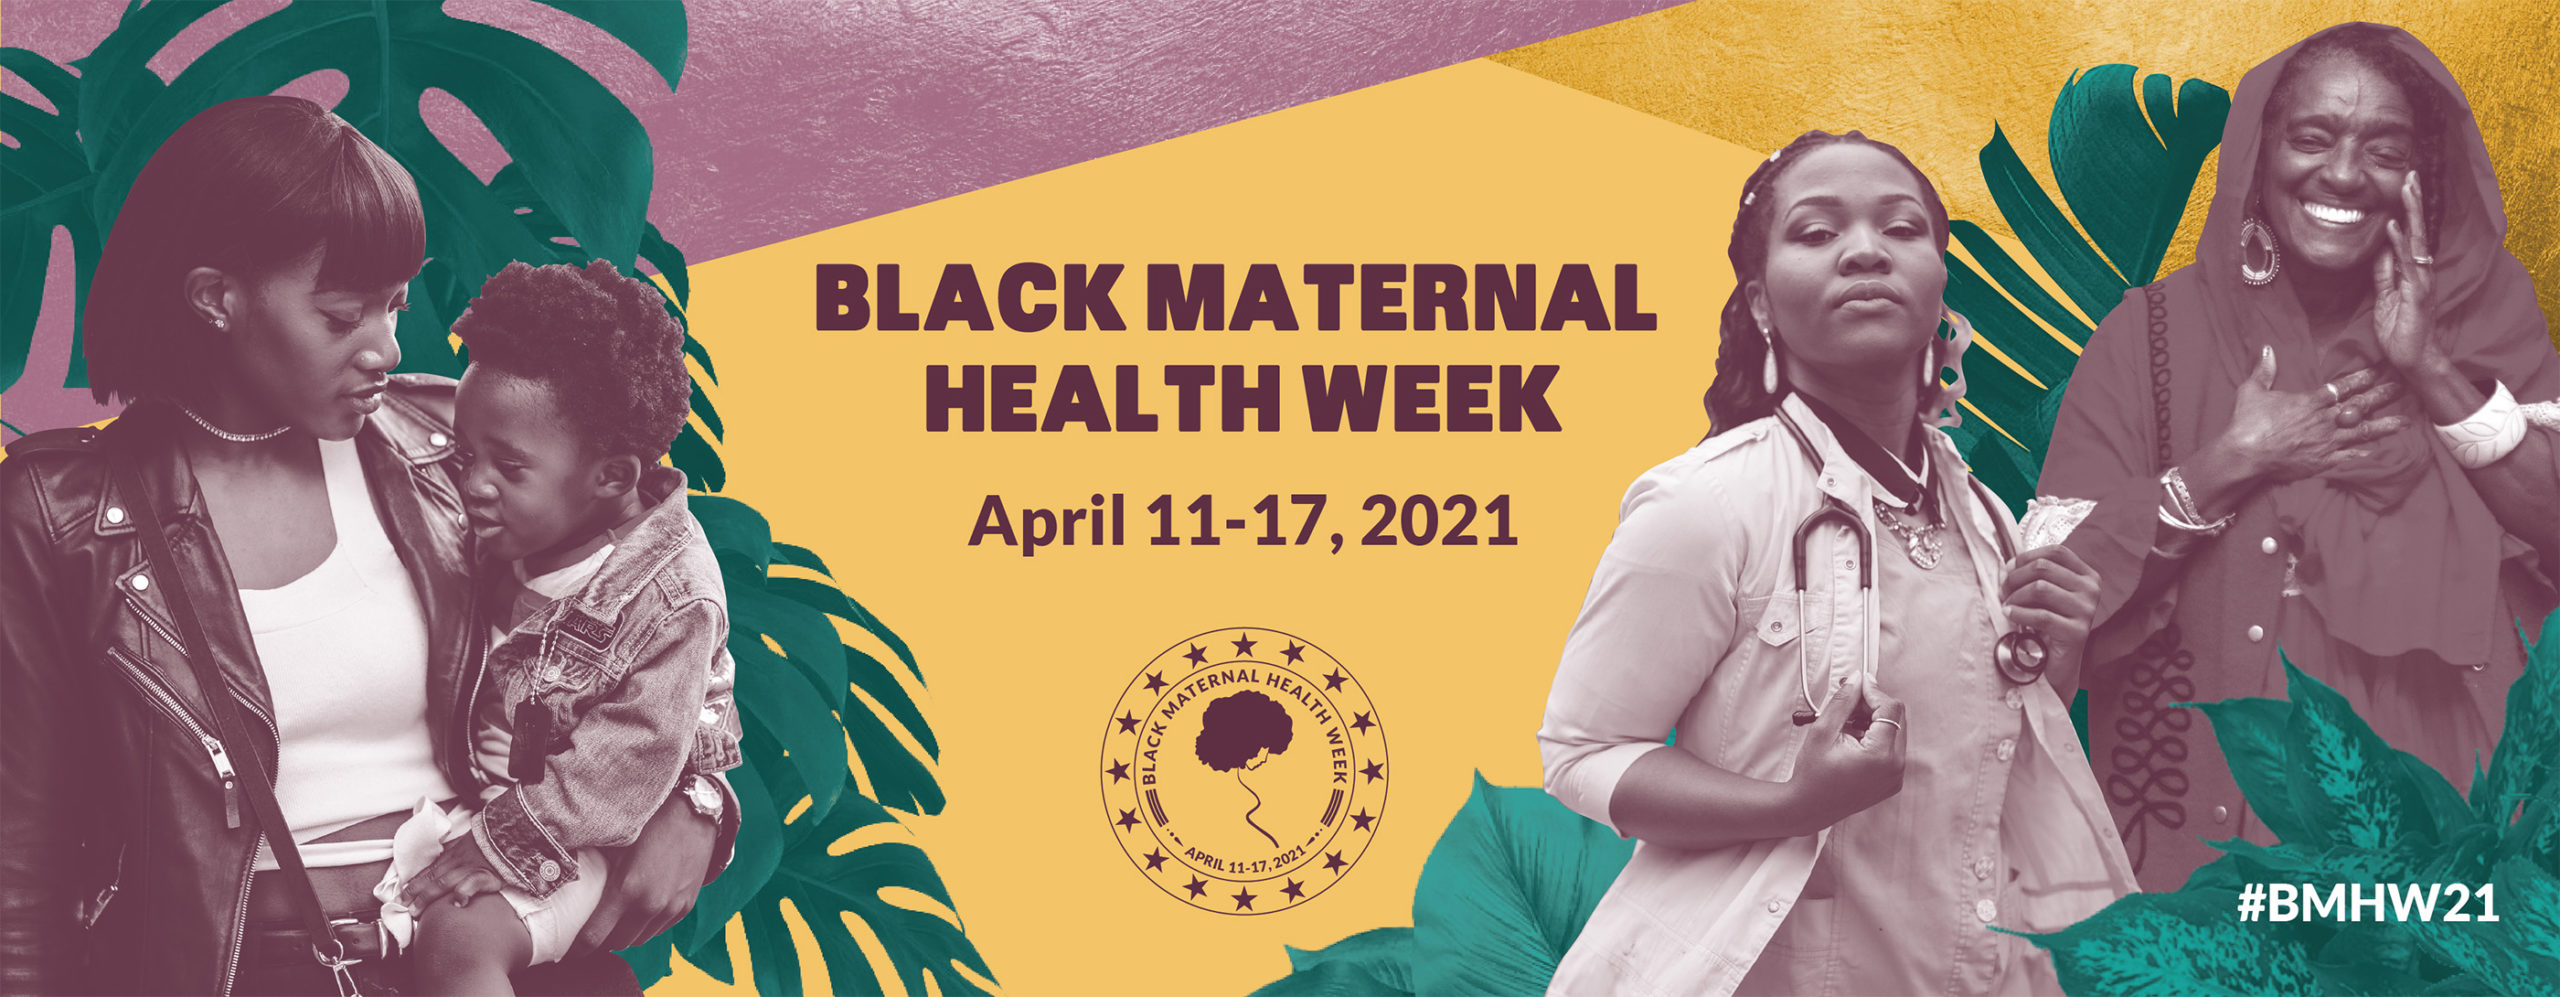 Black Maternal Health Week Diversity, Equity, & Inclusion at UCSF